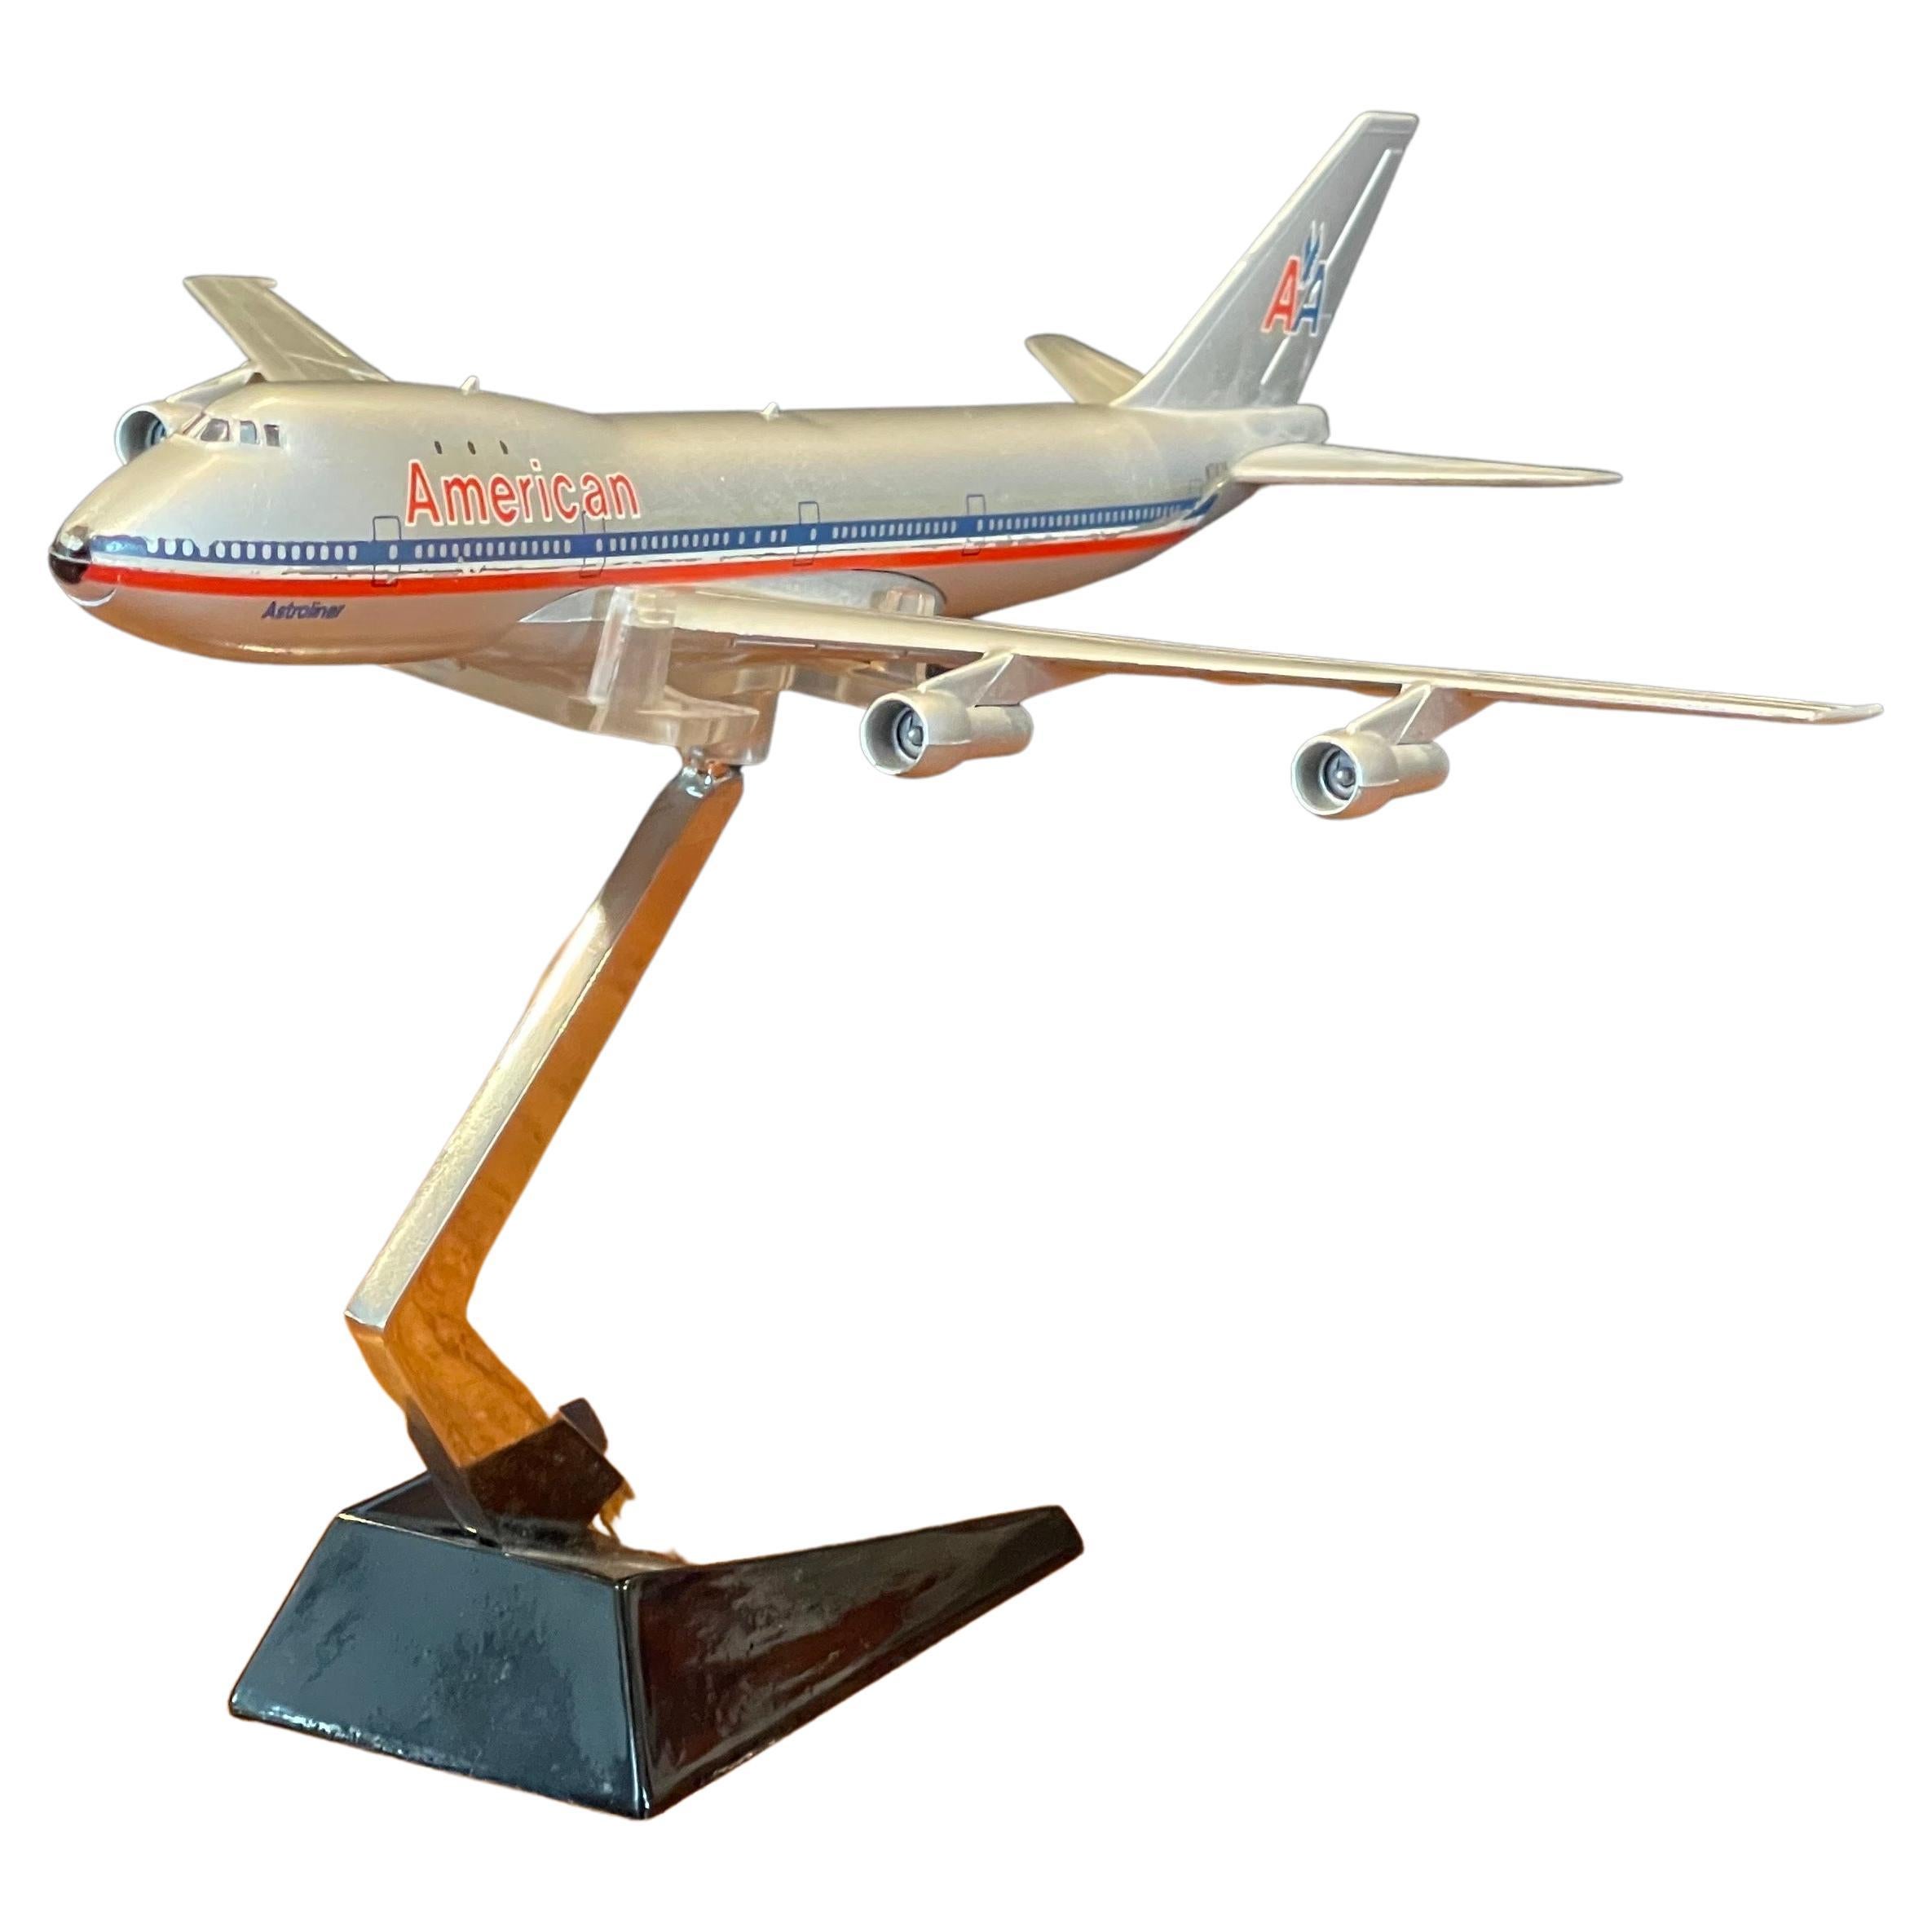 A very cool American Airlines Boeing 747 jetliner / airplane desk model by Aero Mini of Japan, circa 1970s.  The model measures 8